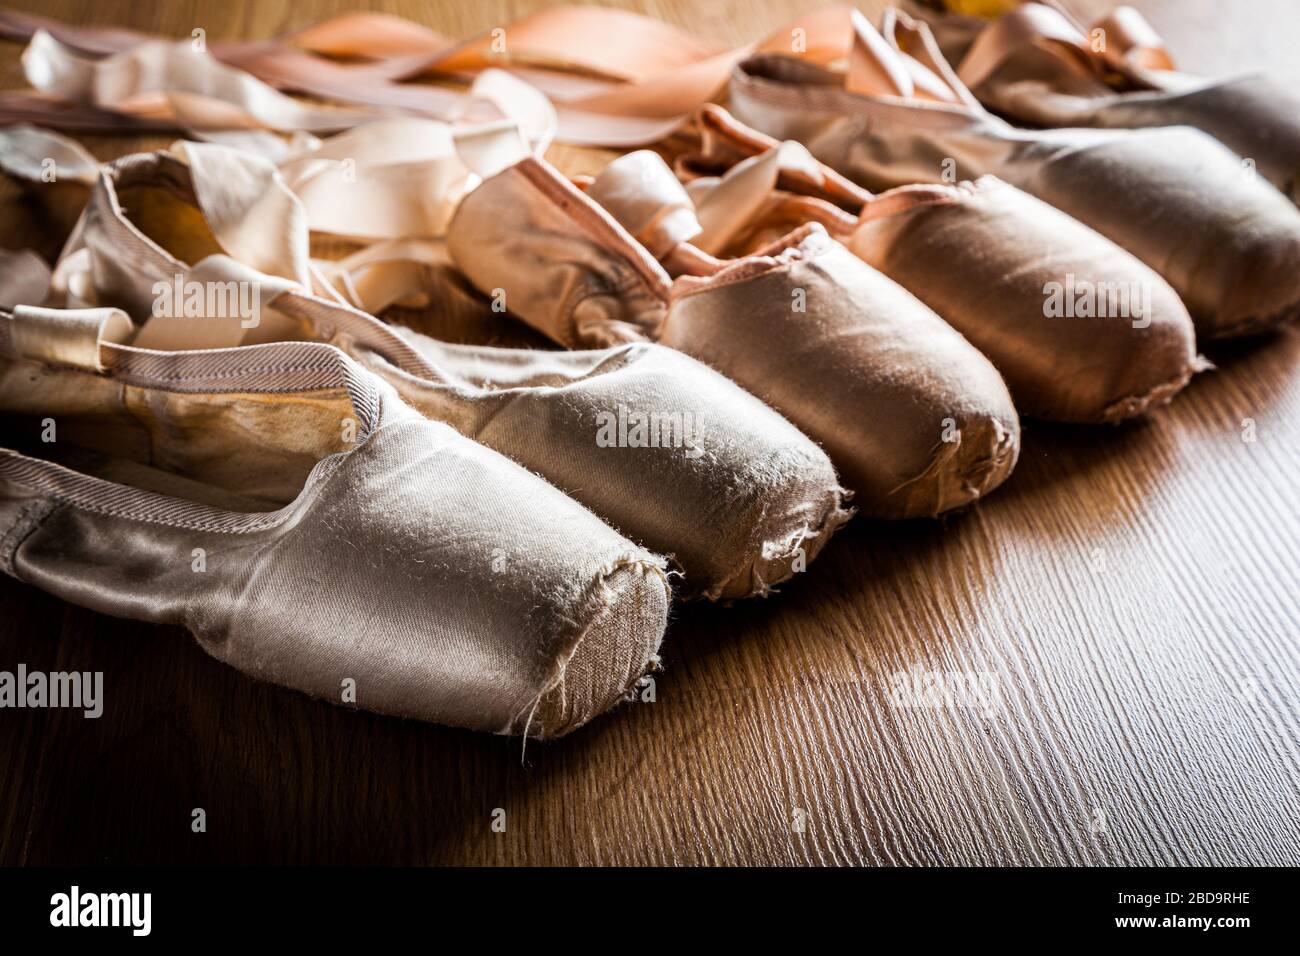 A group of used ballet slipper or pointe shoes Stock Photo - Alamy